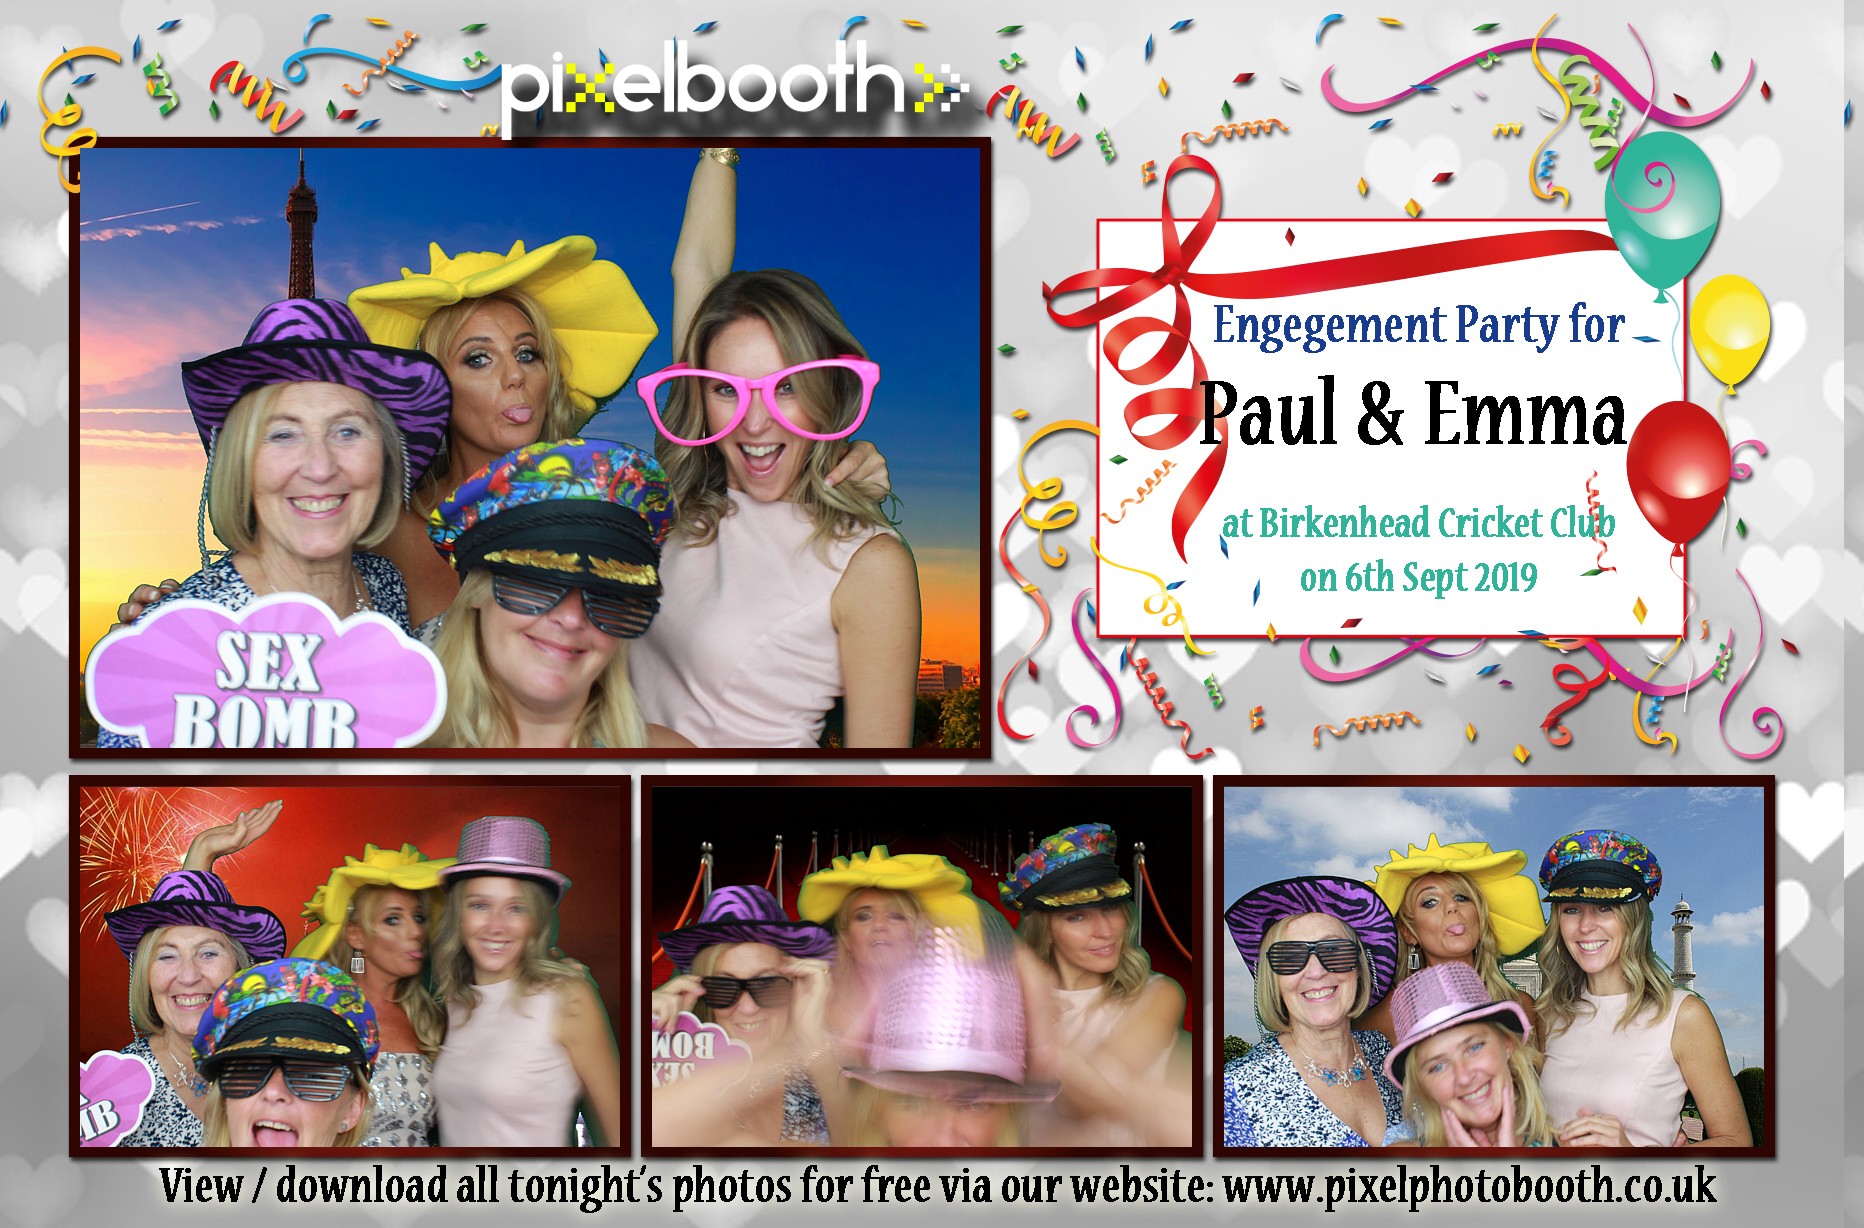 6th Sept 2019: Paul and Emma's Engagement Party